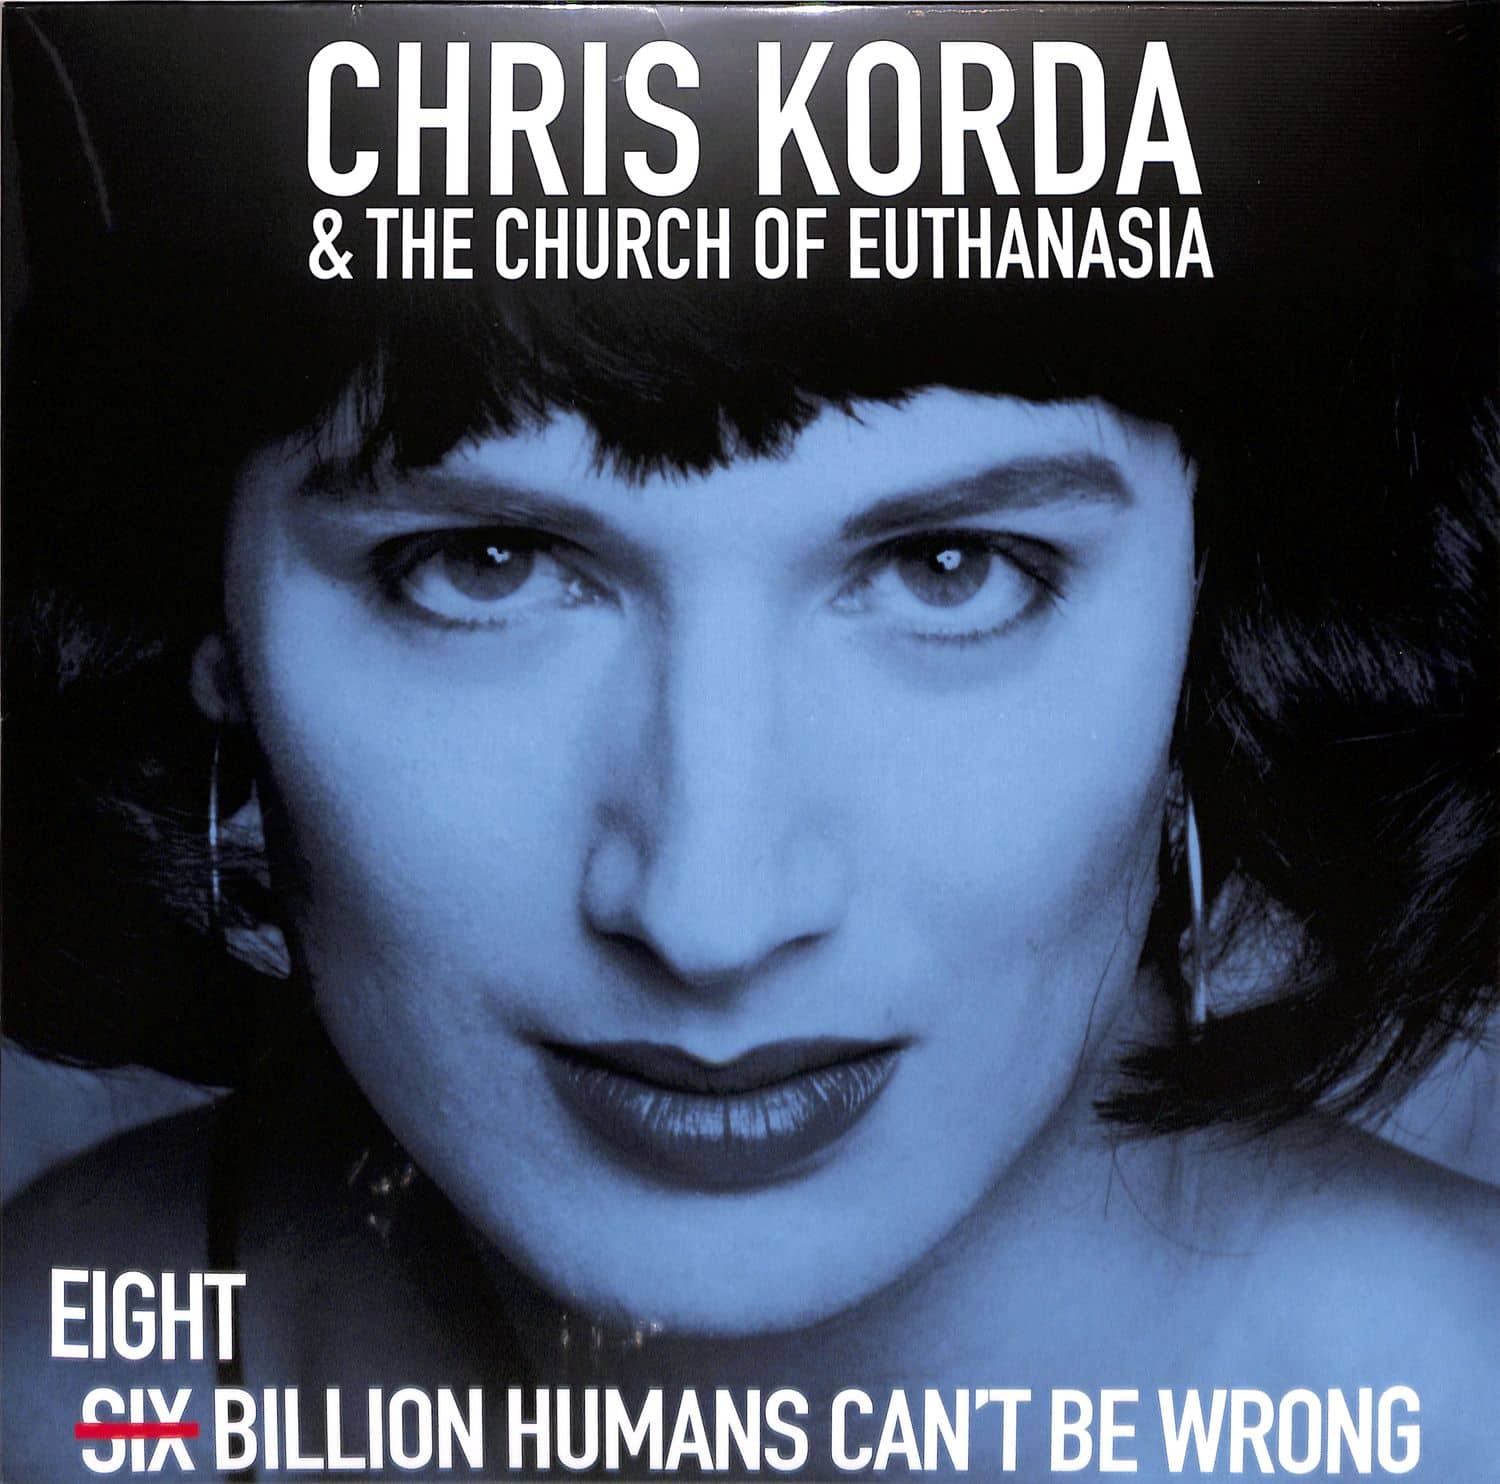 Chris Korda and The Church Of Euthanasia - 8 BILLION HUMANS CANT BE WRONG 